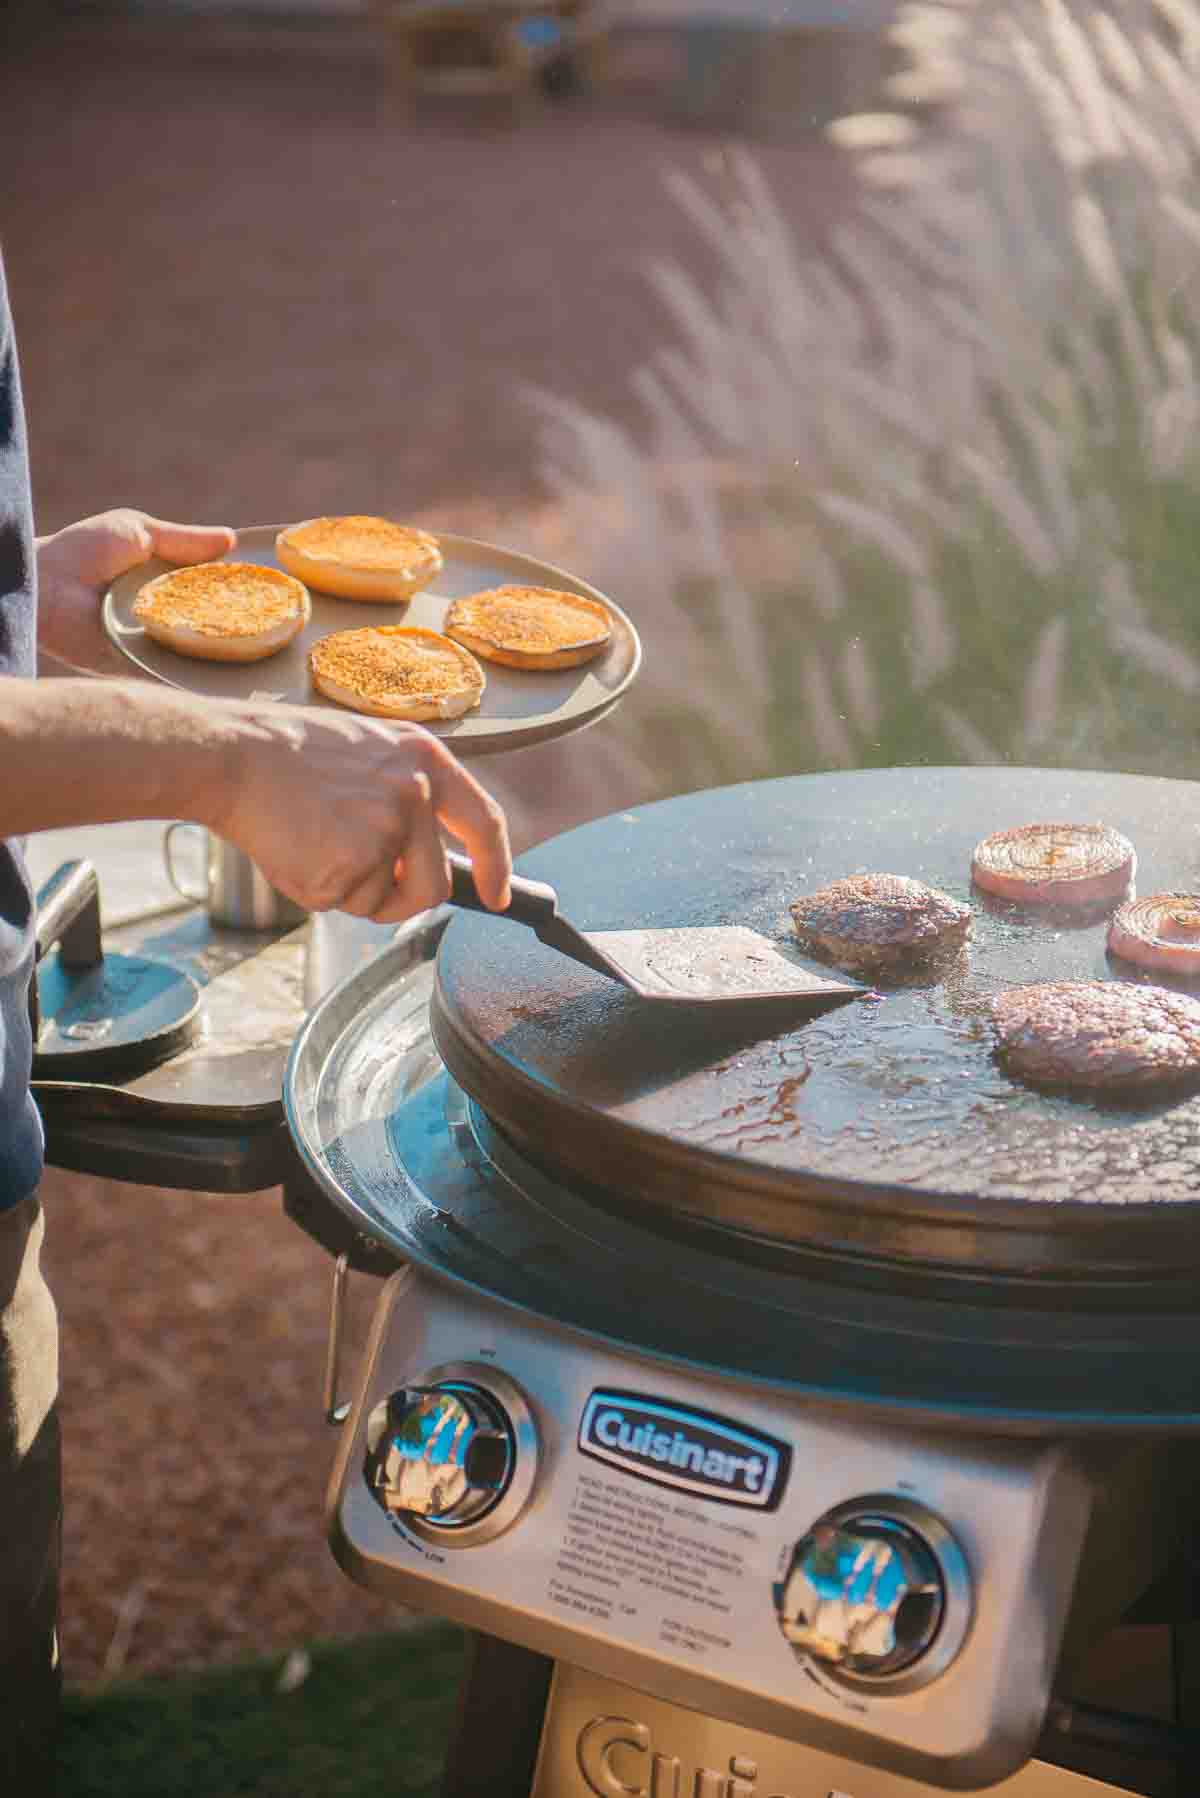 A man is grilling food on a burger.